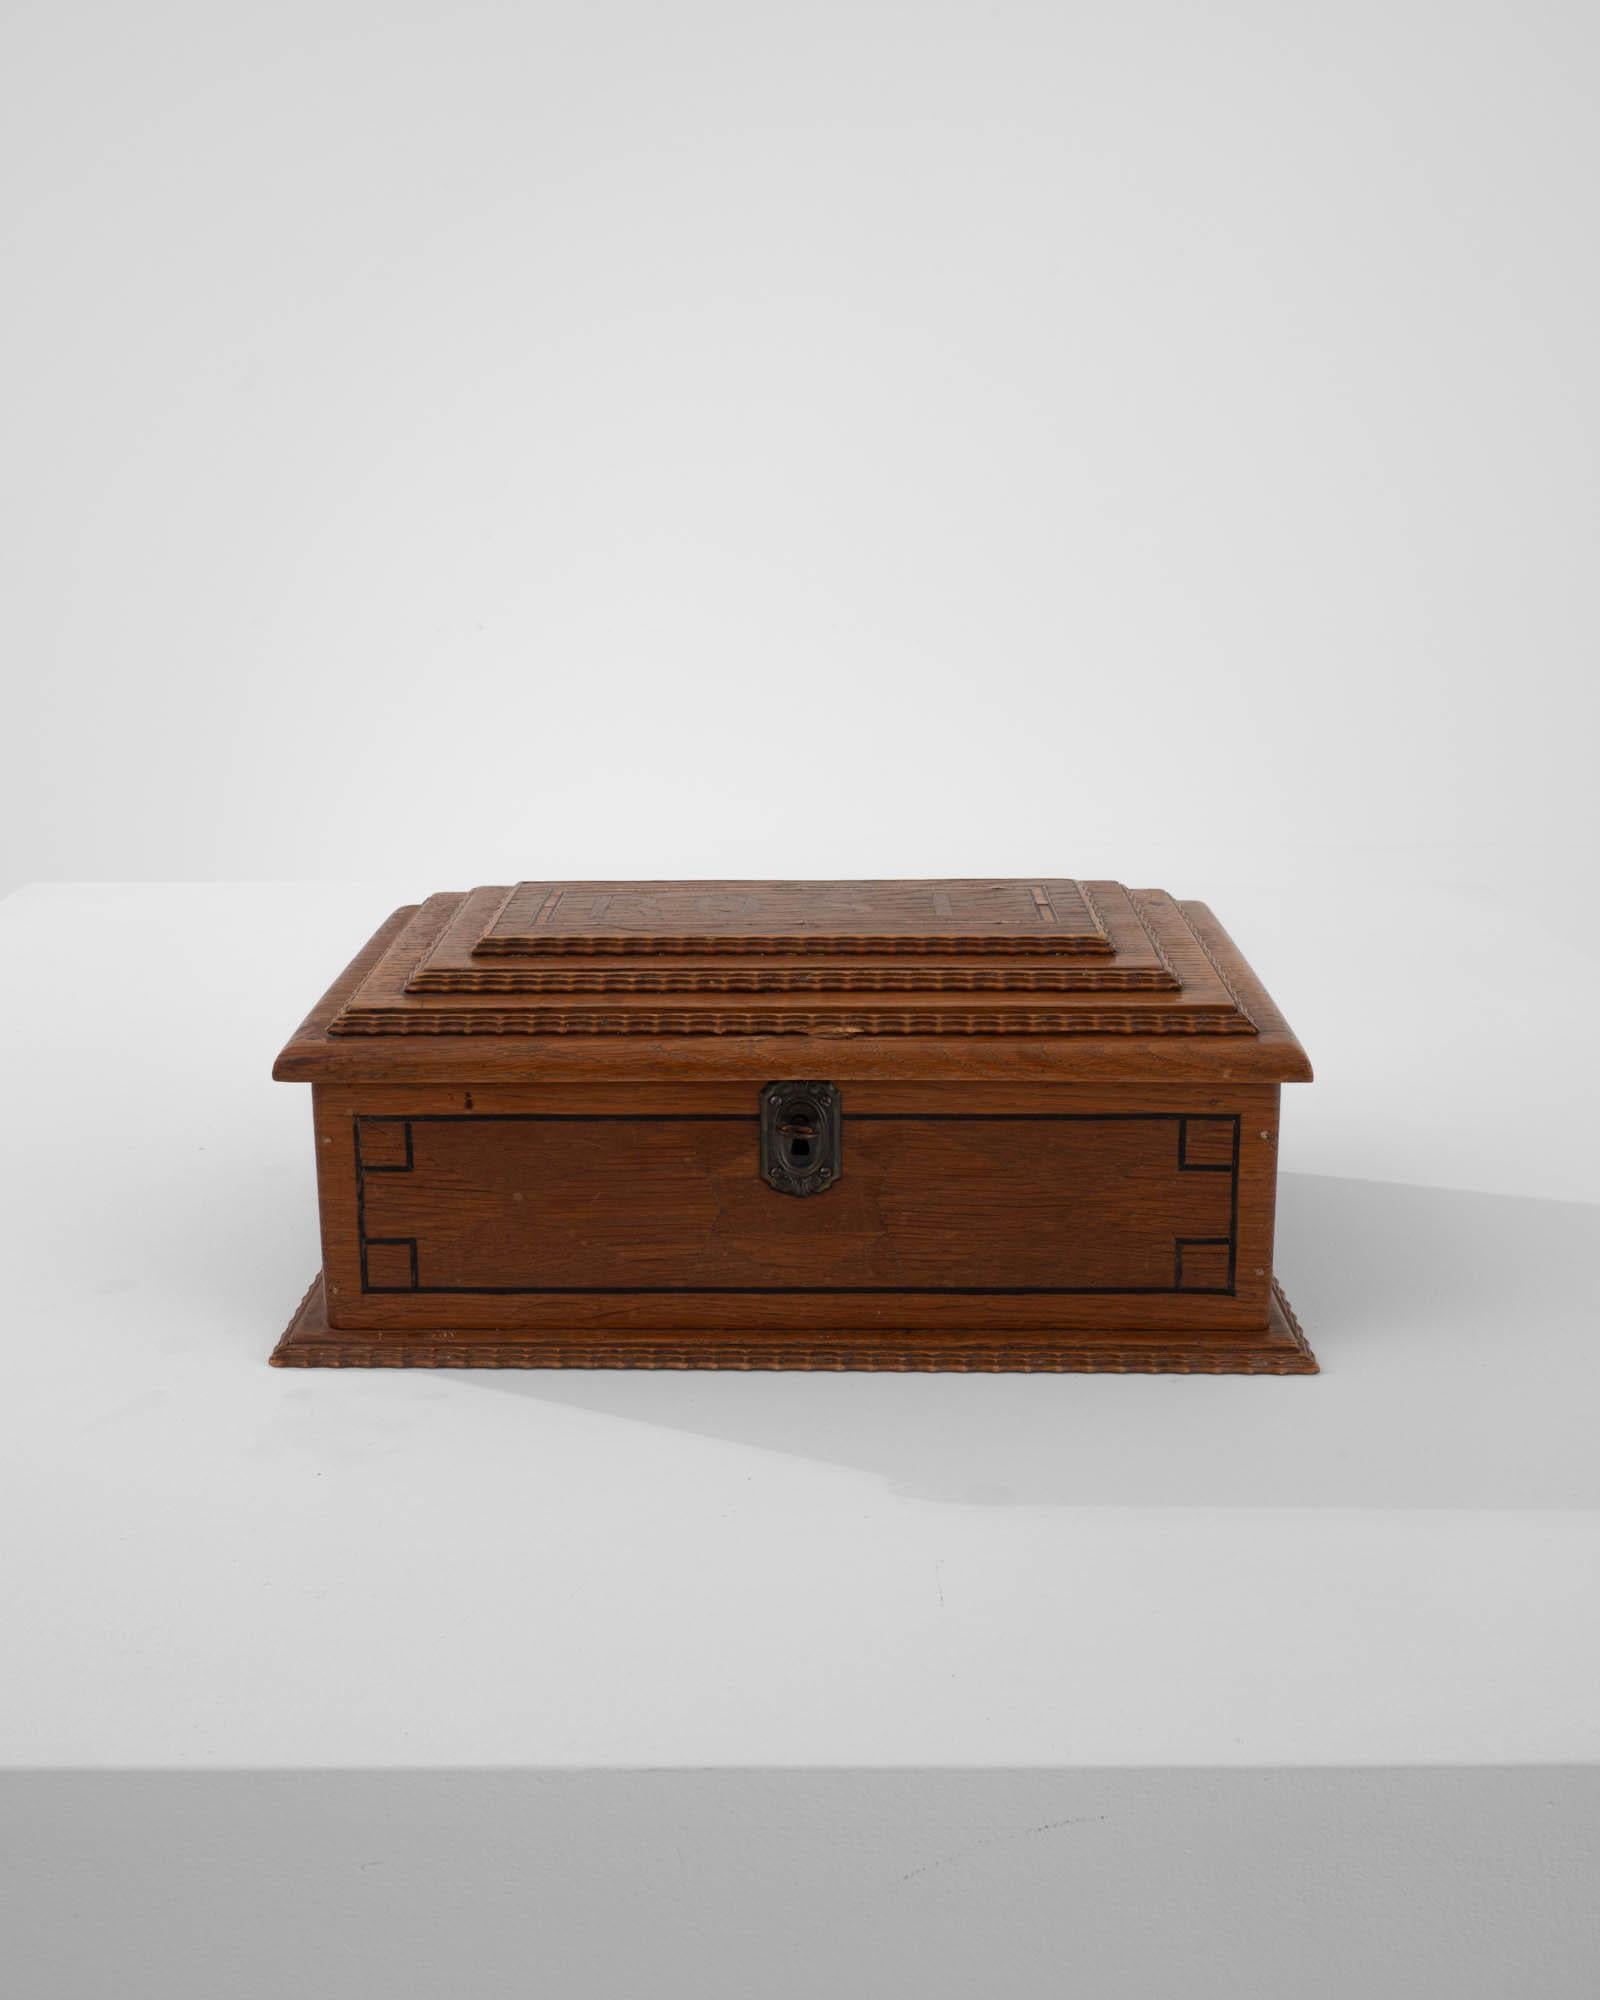 This simple oak jewelry box reveals a surprisingly careful construction, a small lock keeps its contents safe. Inlaid with geometric details, the word “Rose” is carefully pieced together on the box’s lid. Touted through the years, this little